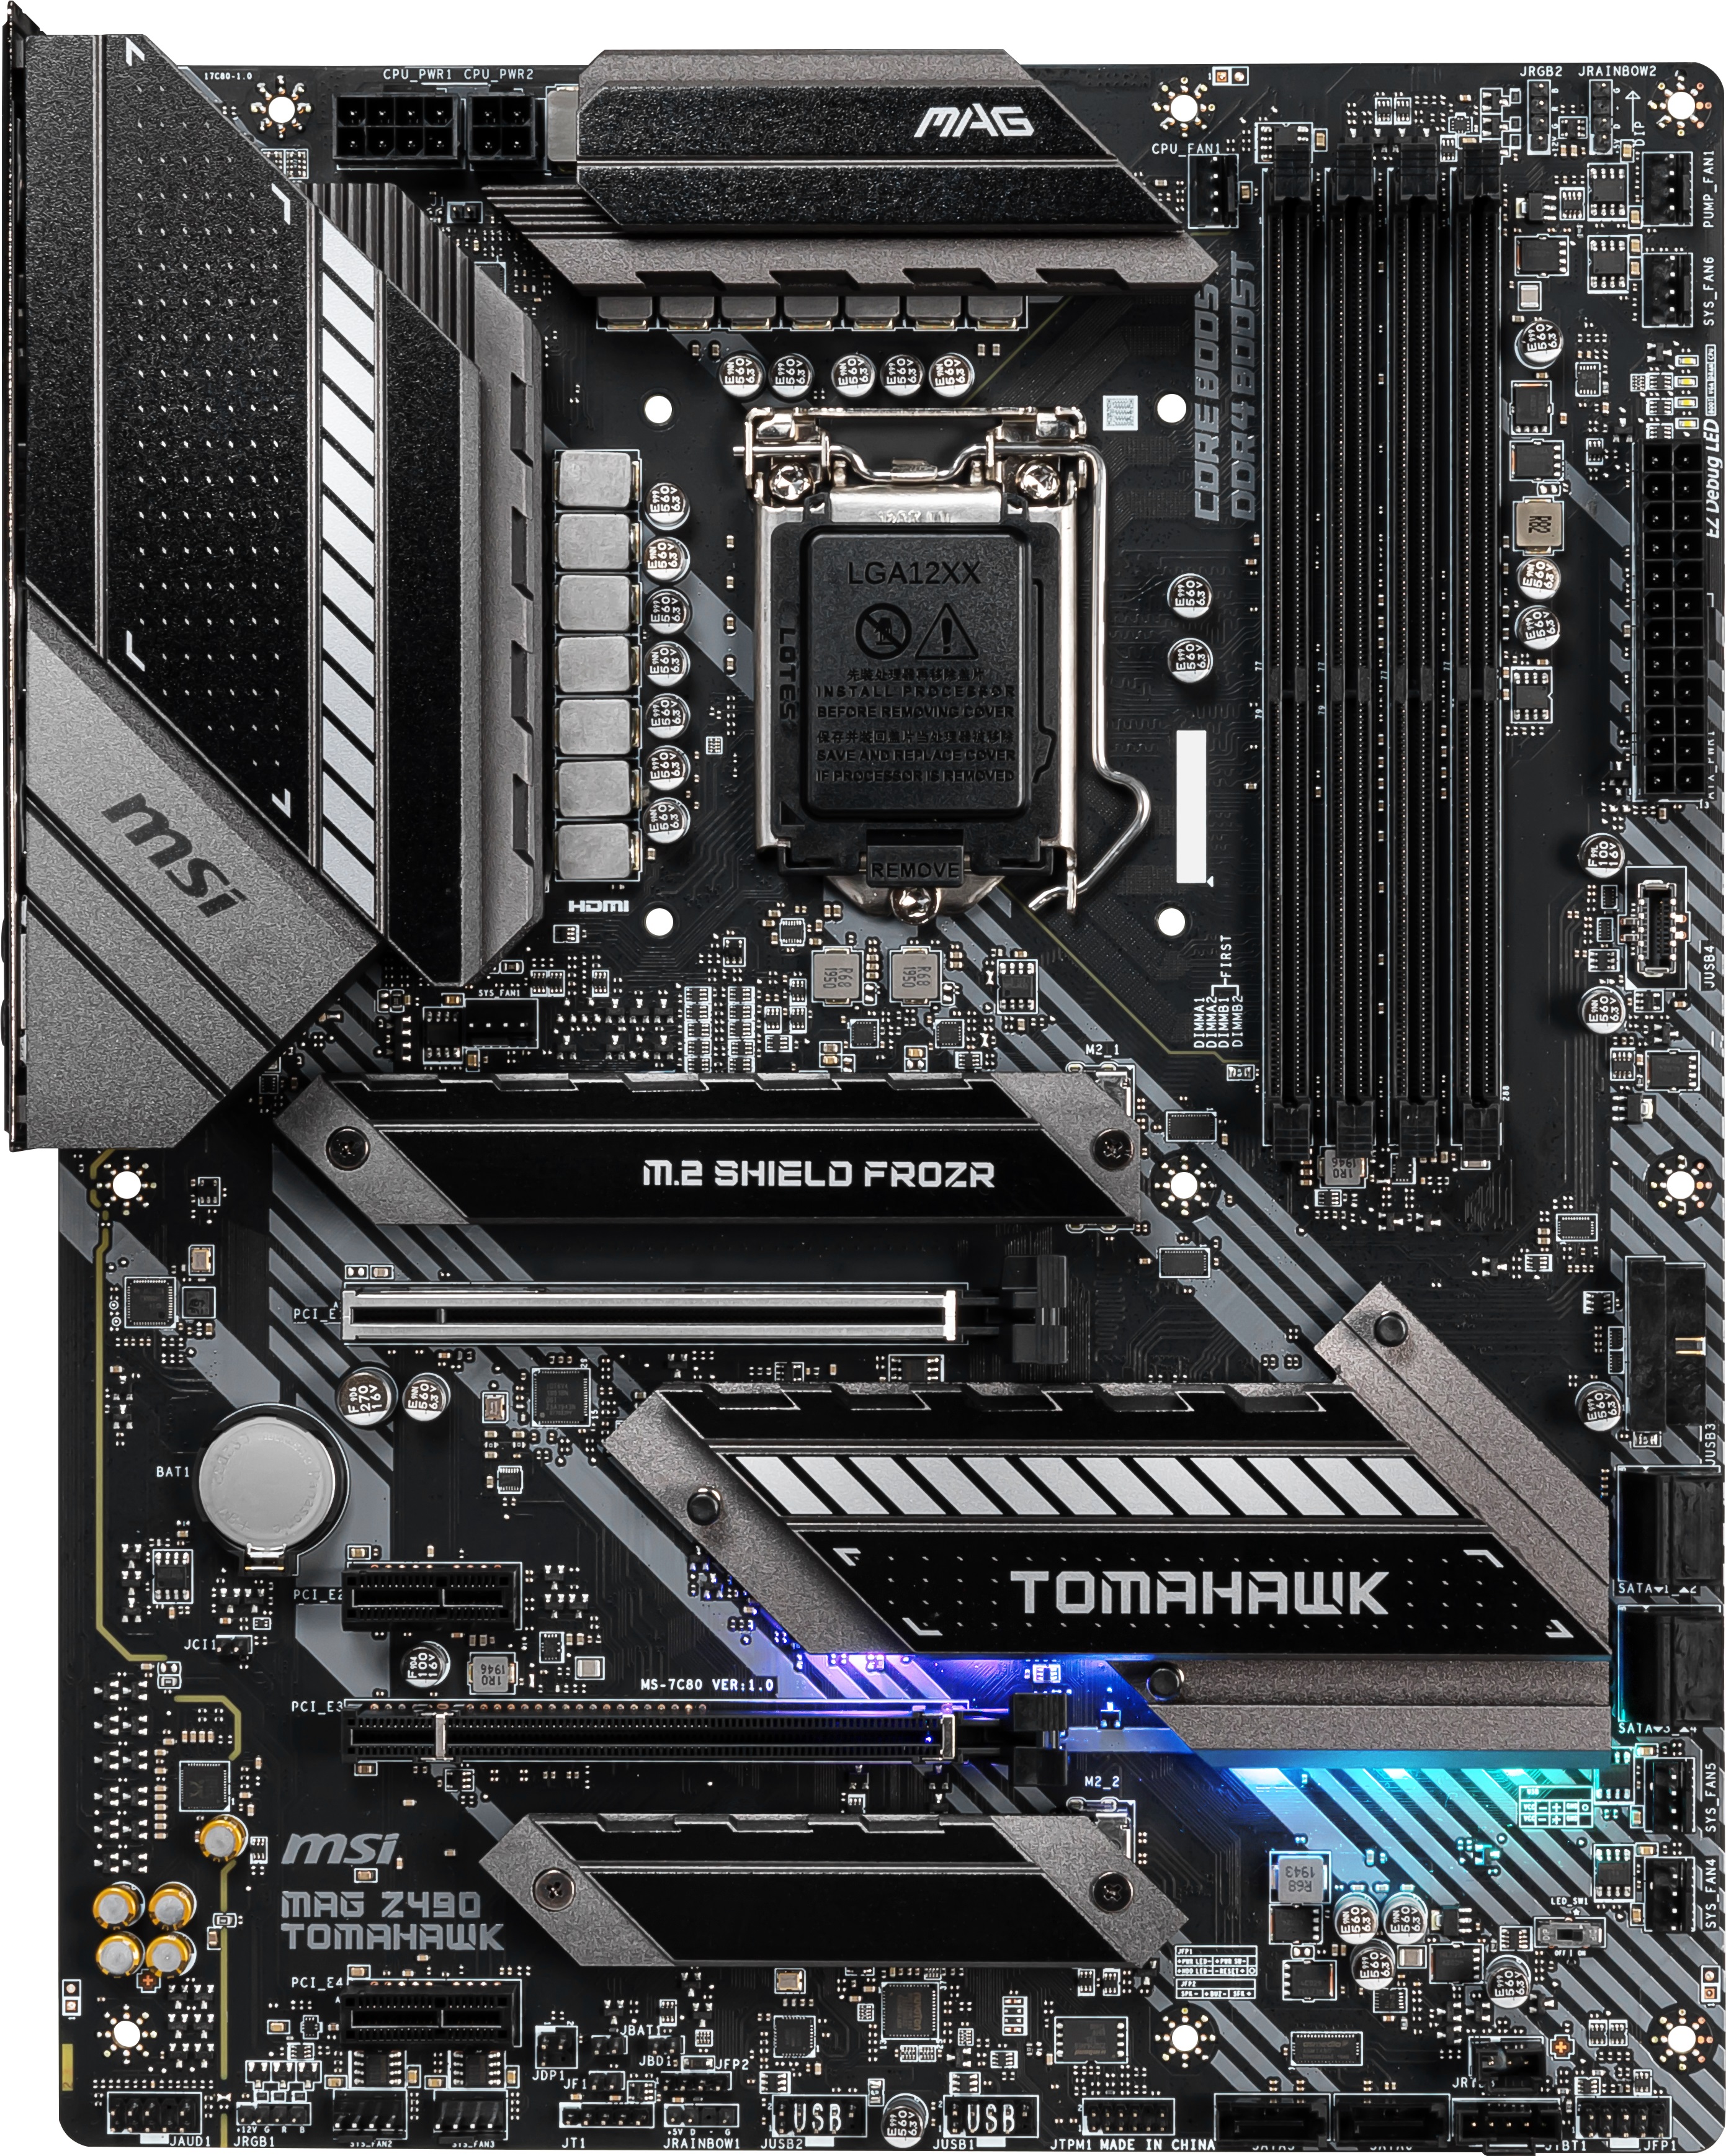 Msi Mag Z490 Tomahawk The Intel Z490 Overview 44 Motherboards Examined